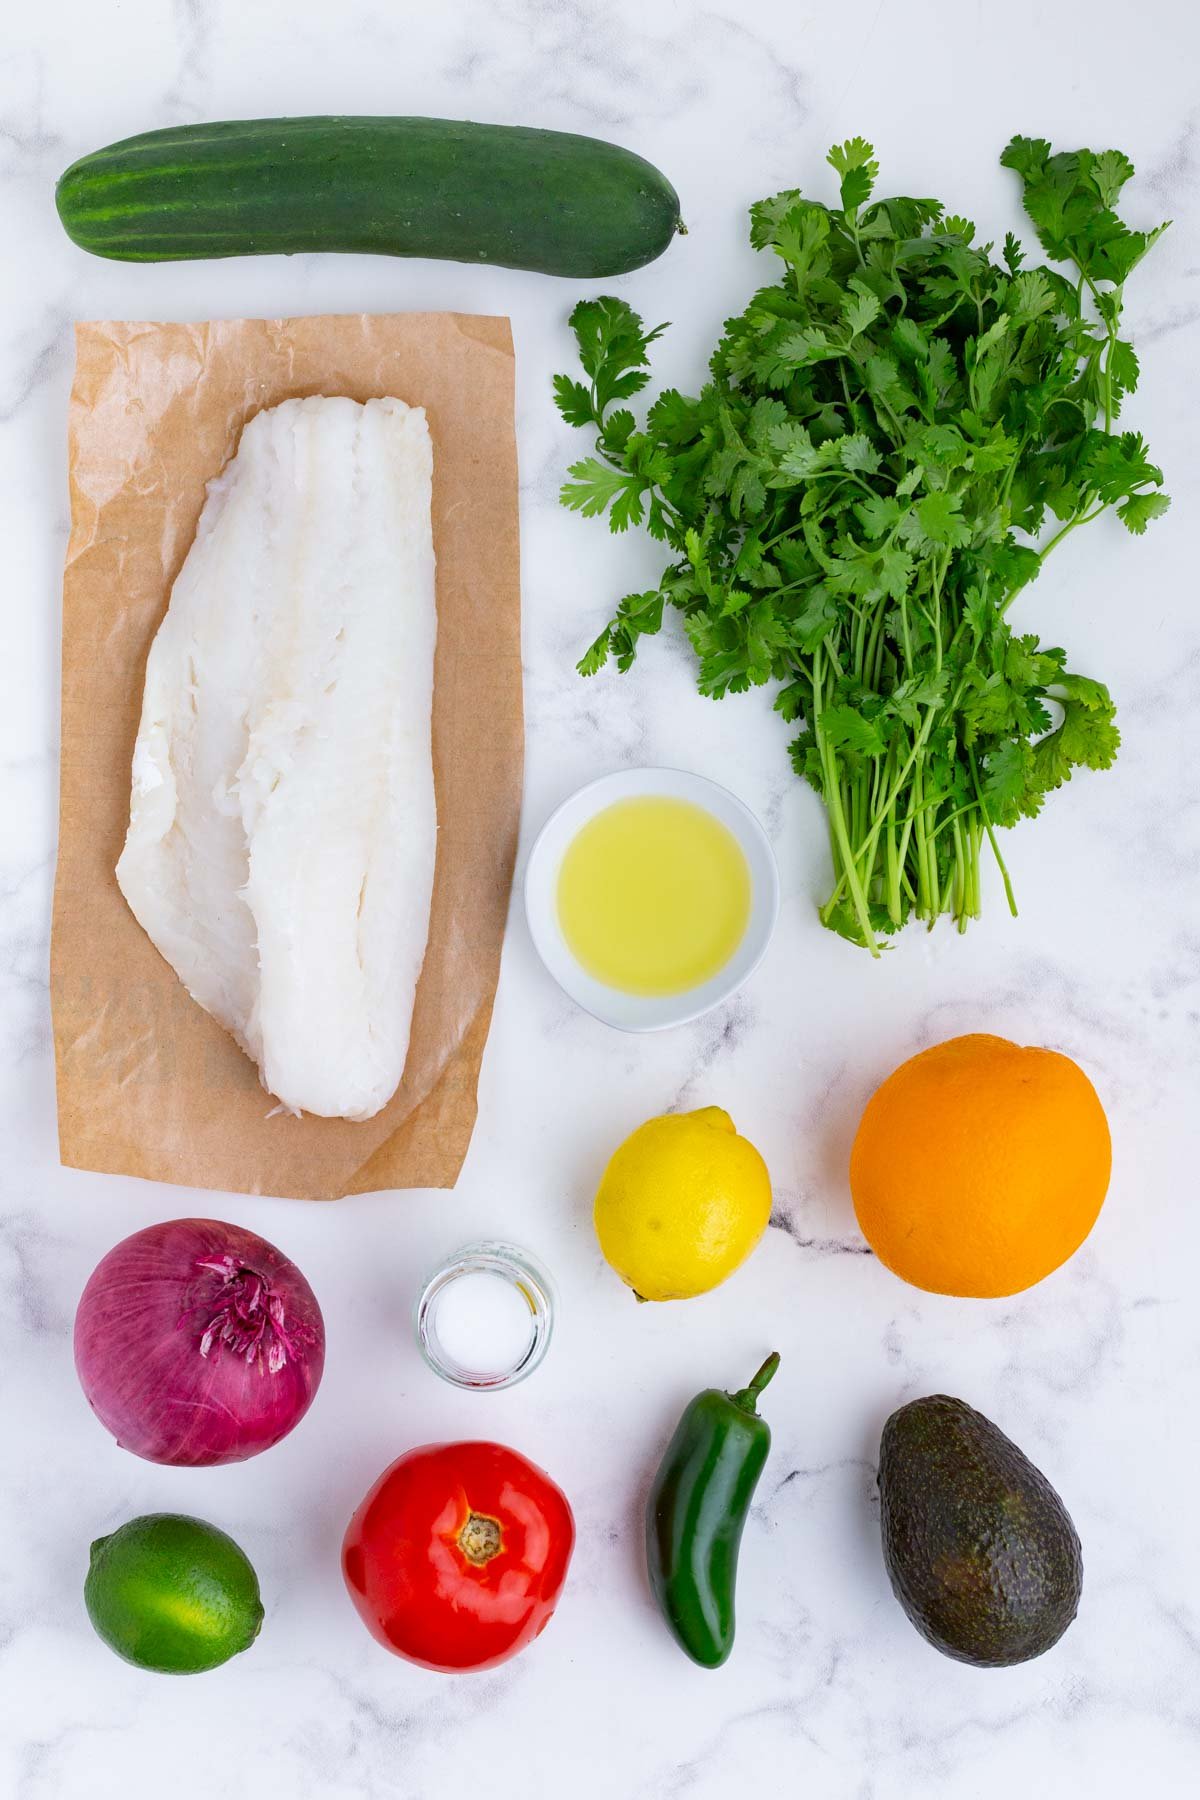 Fish, cilantro, citrus, onion, peppers, and salt are the ingredients for this dish.